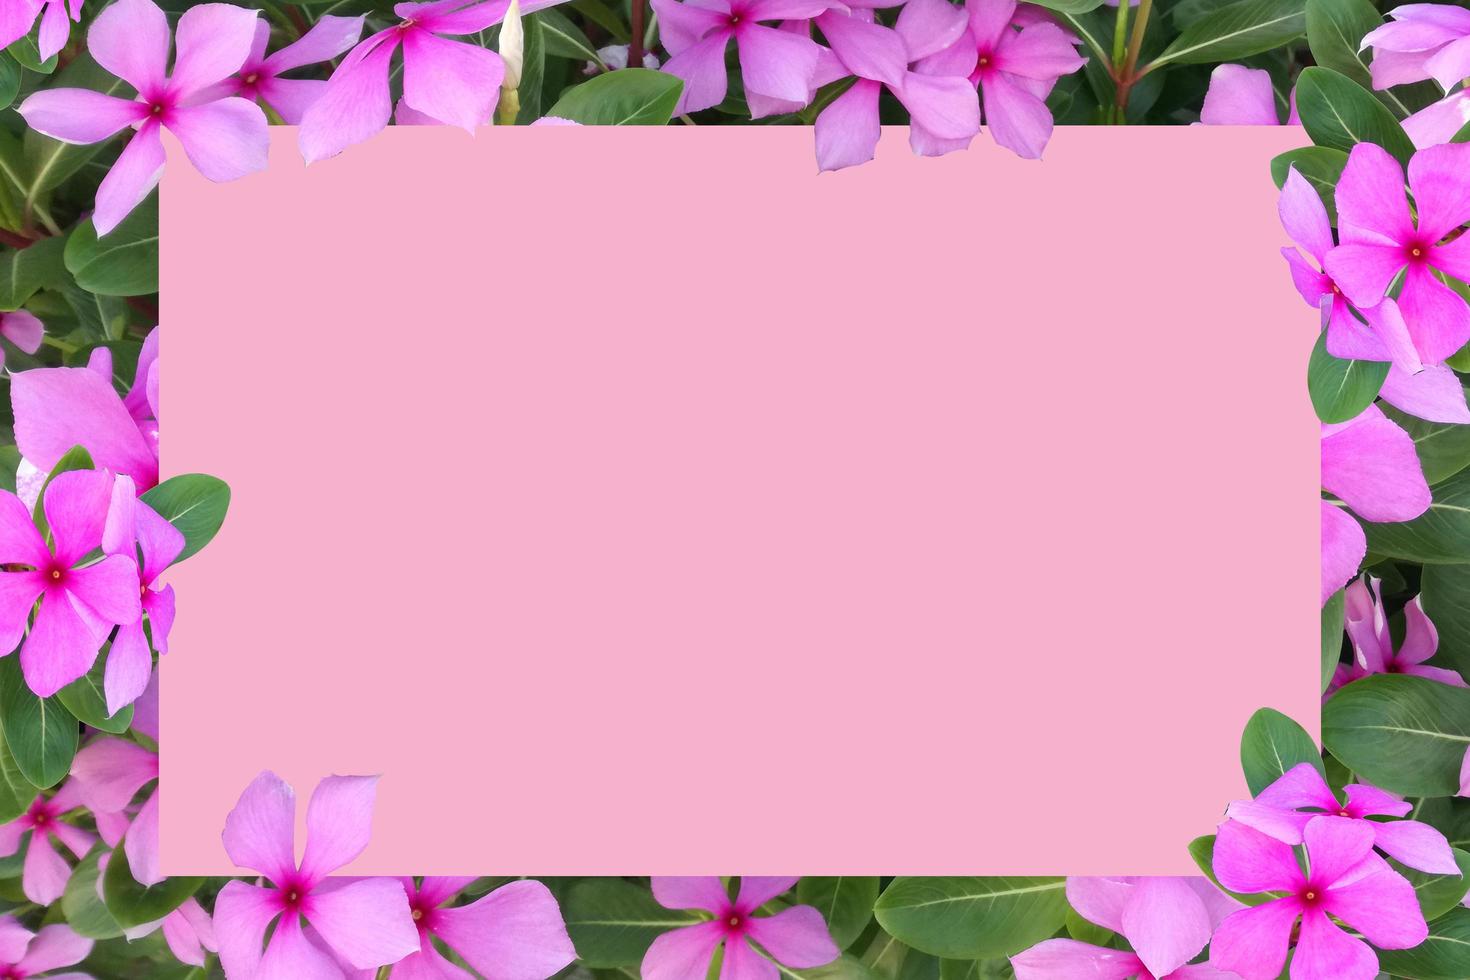 Paper Card Mockup on a Green Leaves,White blank space for text with flowers as backdrop,frame design, West indian periwinkle. photo